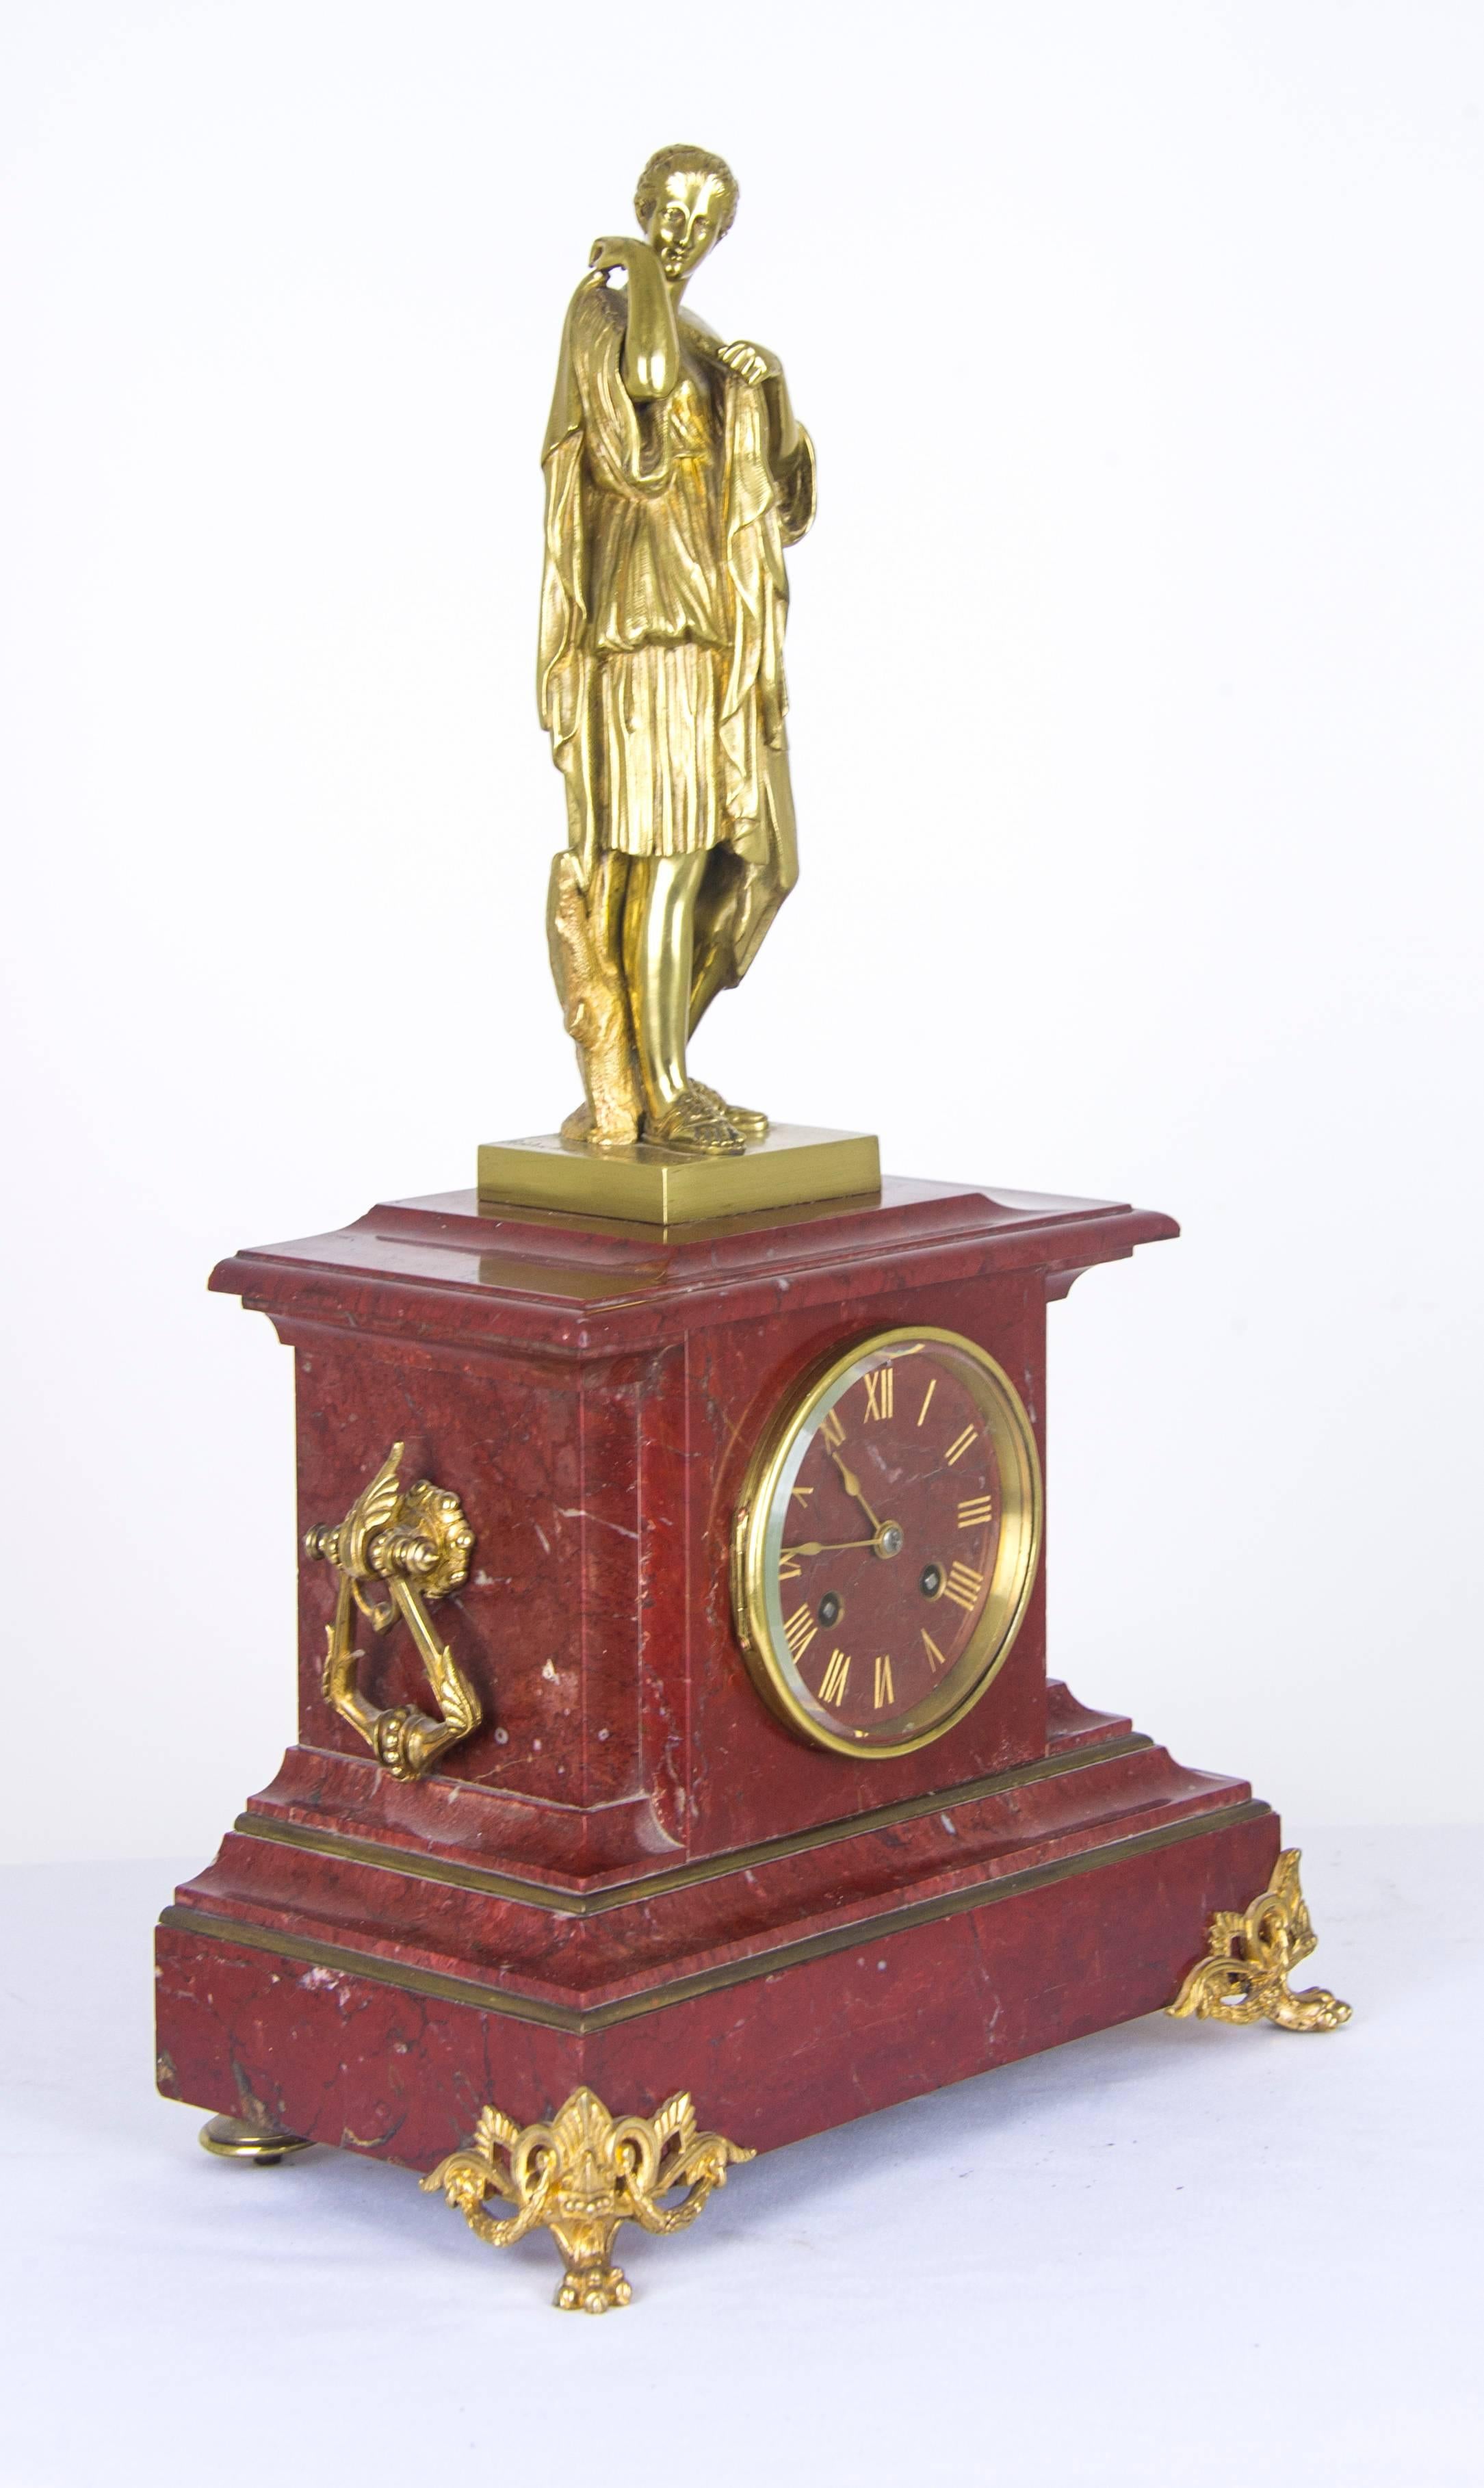 Hand-Crafted Antique Mantel Clock, French Rouge Marble Clock, Gilt Bronze Mantel Clock